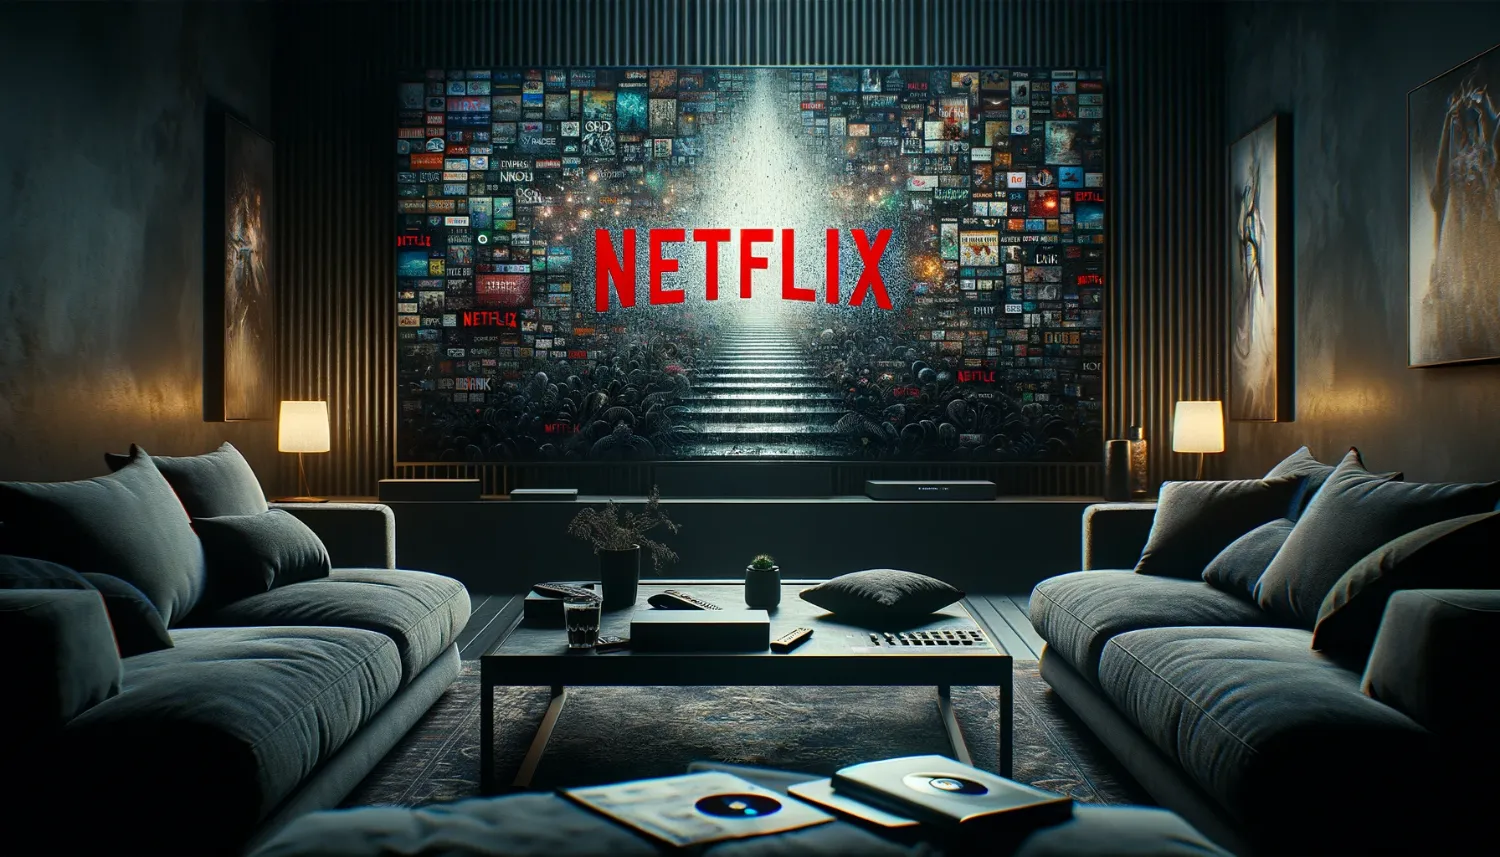 Streaming Netflix and co, DVD is on the table